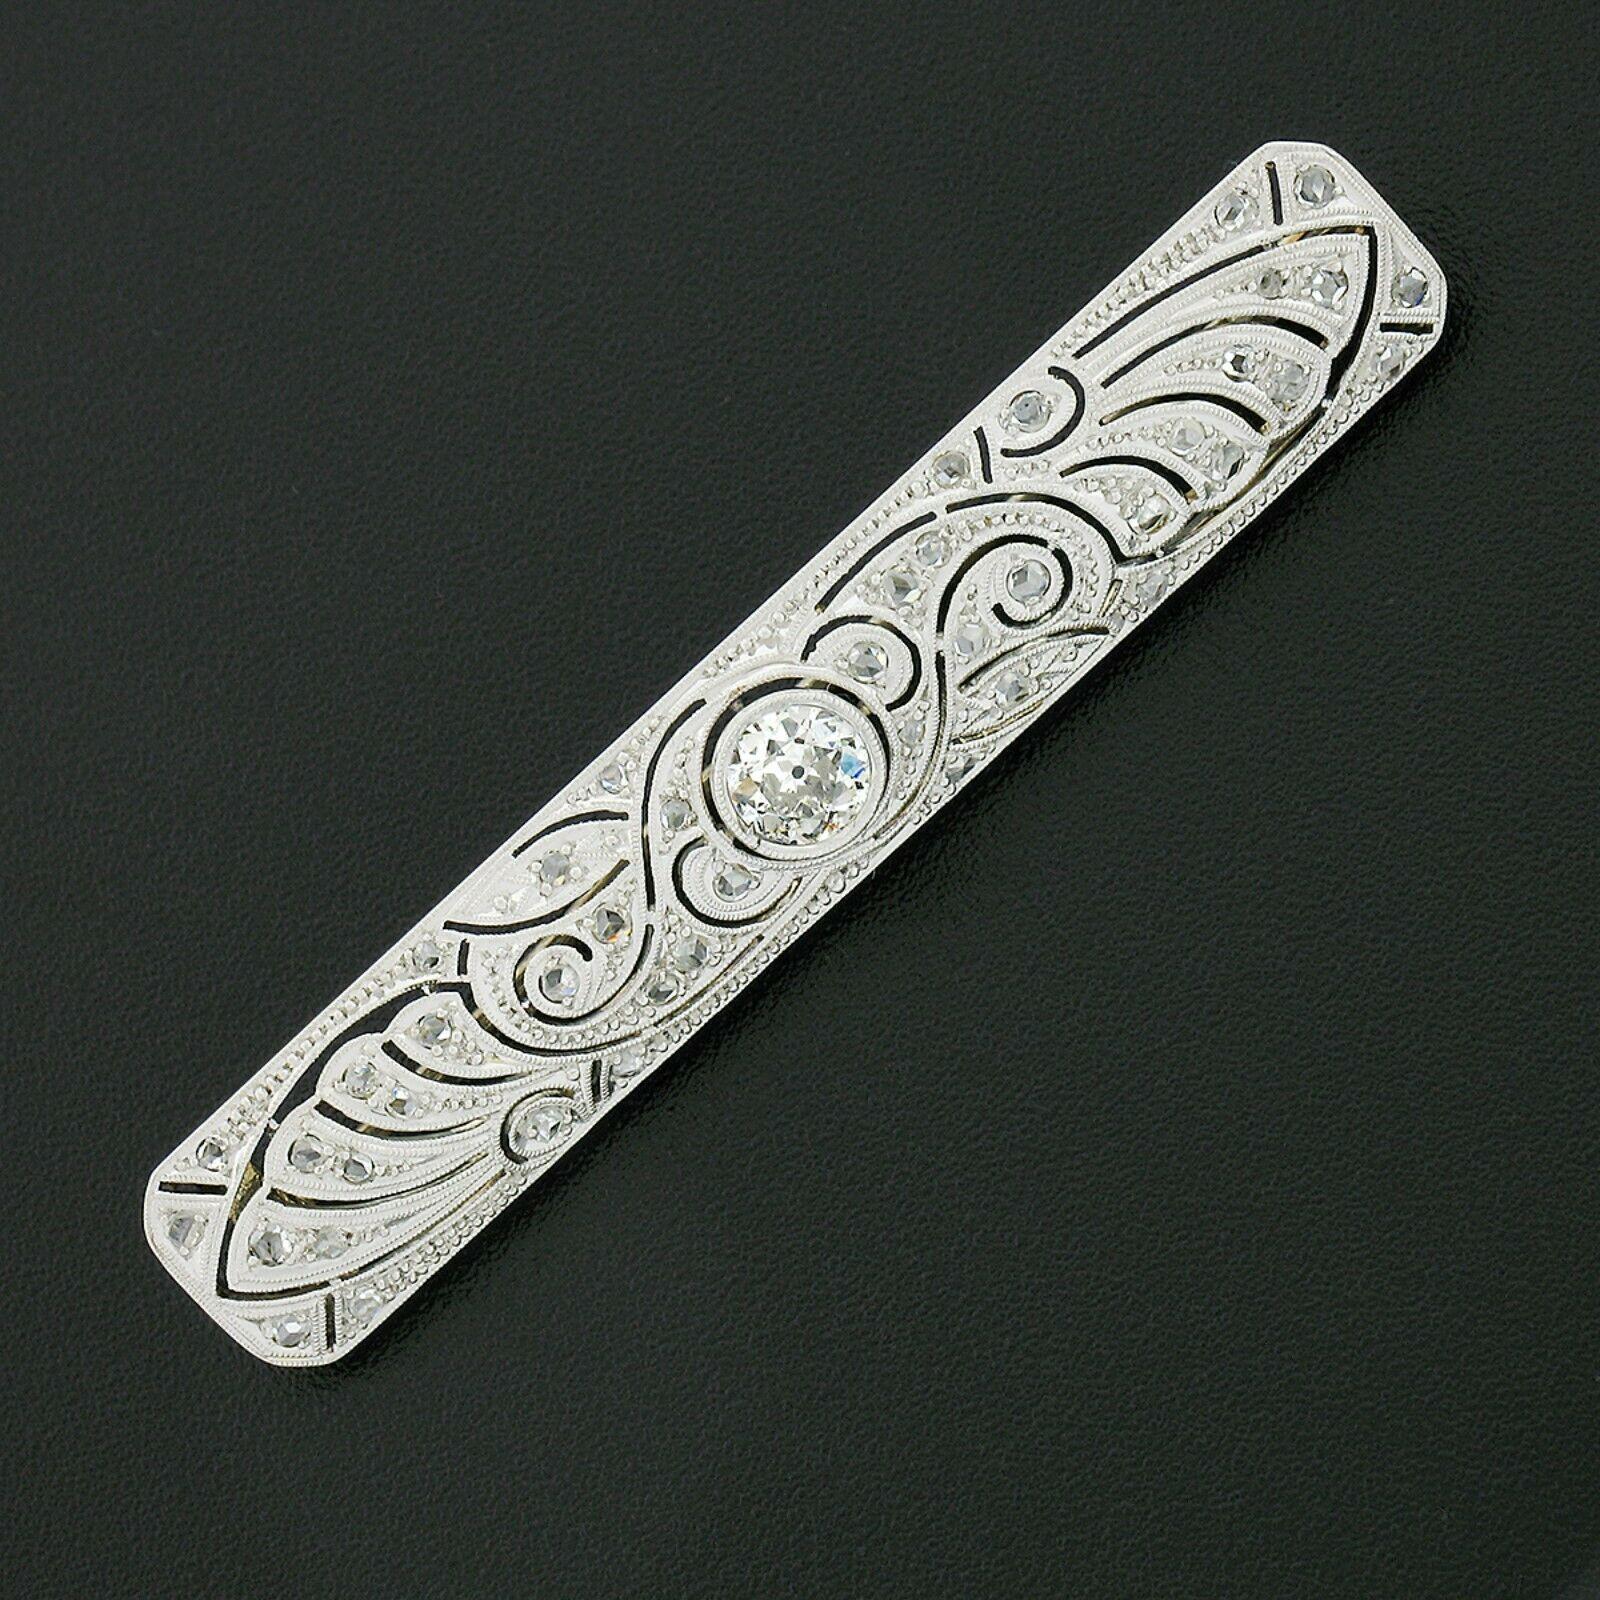 This stunning antique bar pin was crafted from solid 18k white gold during the Belle Epoque period and features a long rectangular shape set with fine diamonds throughout. The center of the brooch displays a breathtaking old European cut diamond